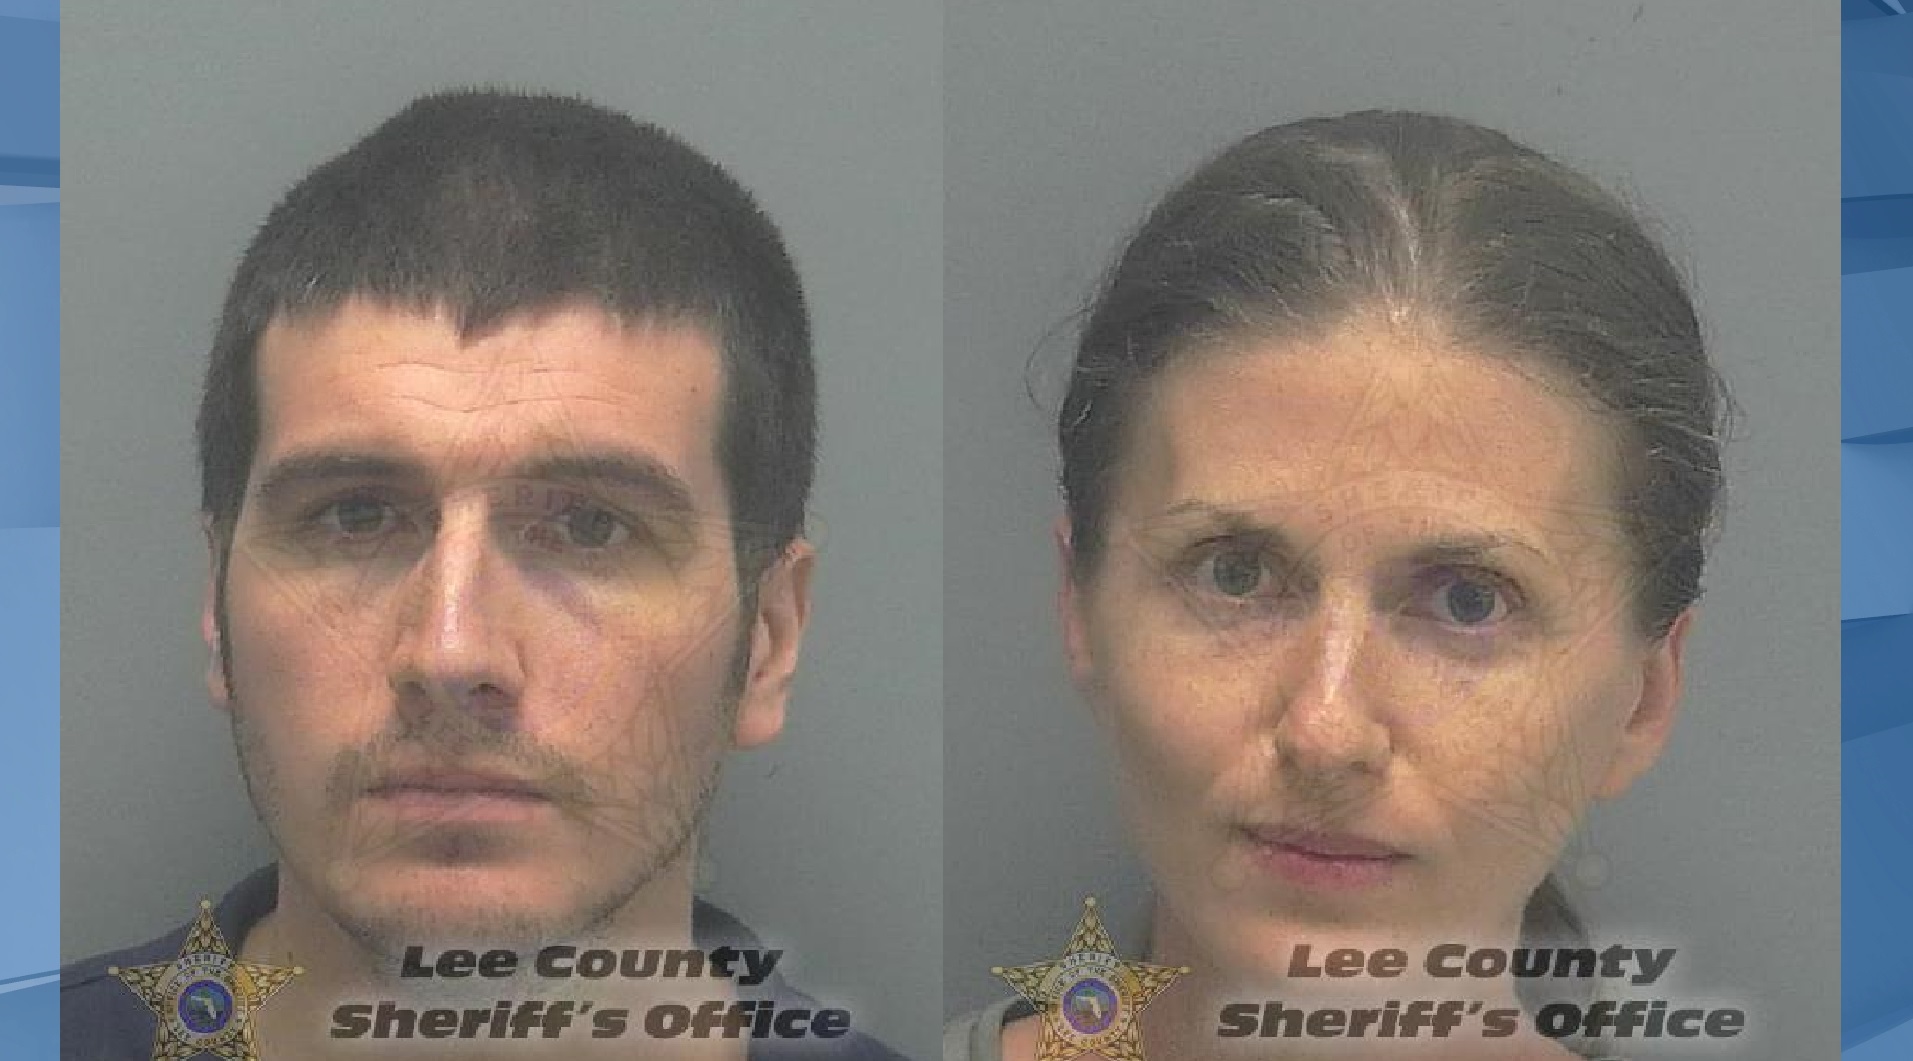 Ryan O'Leary and Sheila O'Leary. (Credit Lee County Sheriff's Office.)